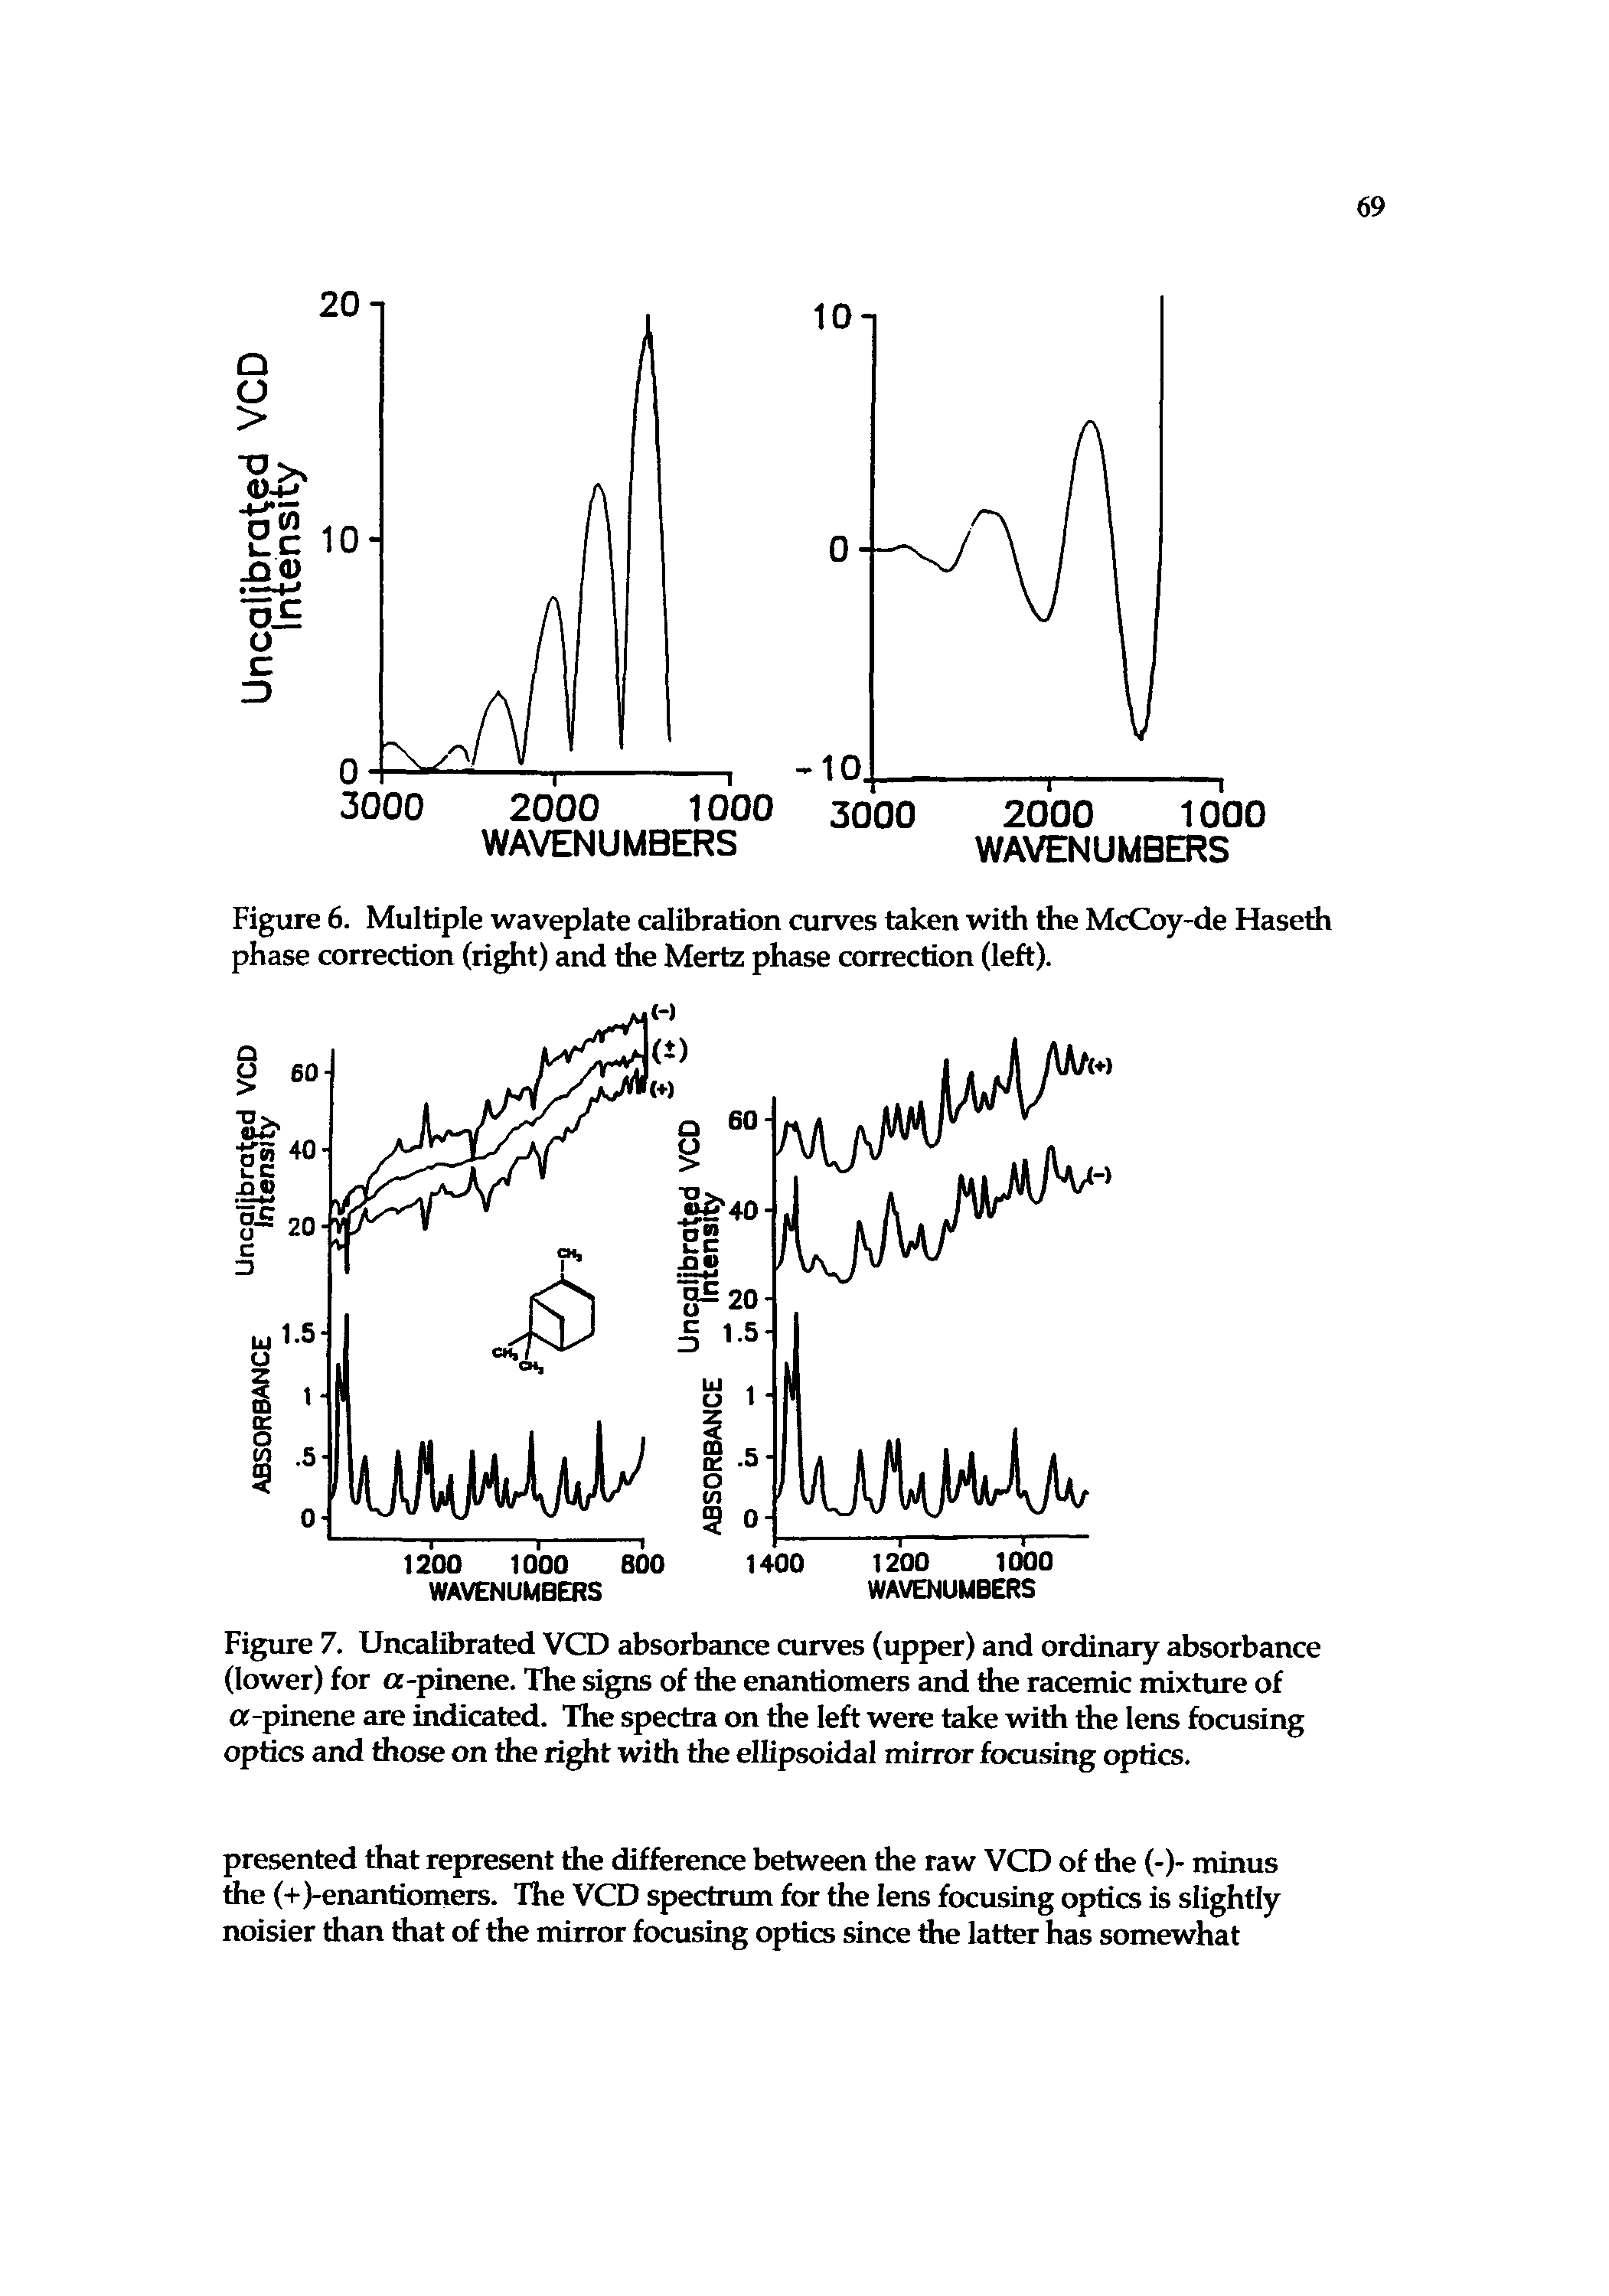 Figure 7. Uncalibrated VCD absorbance curves (upper) and ordinary absorbance (lower) for a-pinene. The signs of the enantiomers and the racemic mixture of a-pinene are indicated. The spectra on the left were take with the lens focusing optics and those on the right with the ellipsoidal mirror focusing optics.